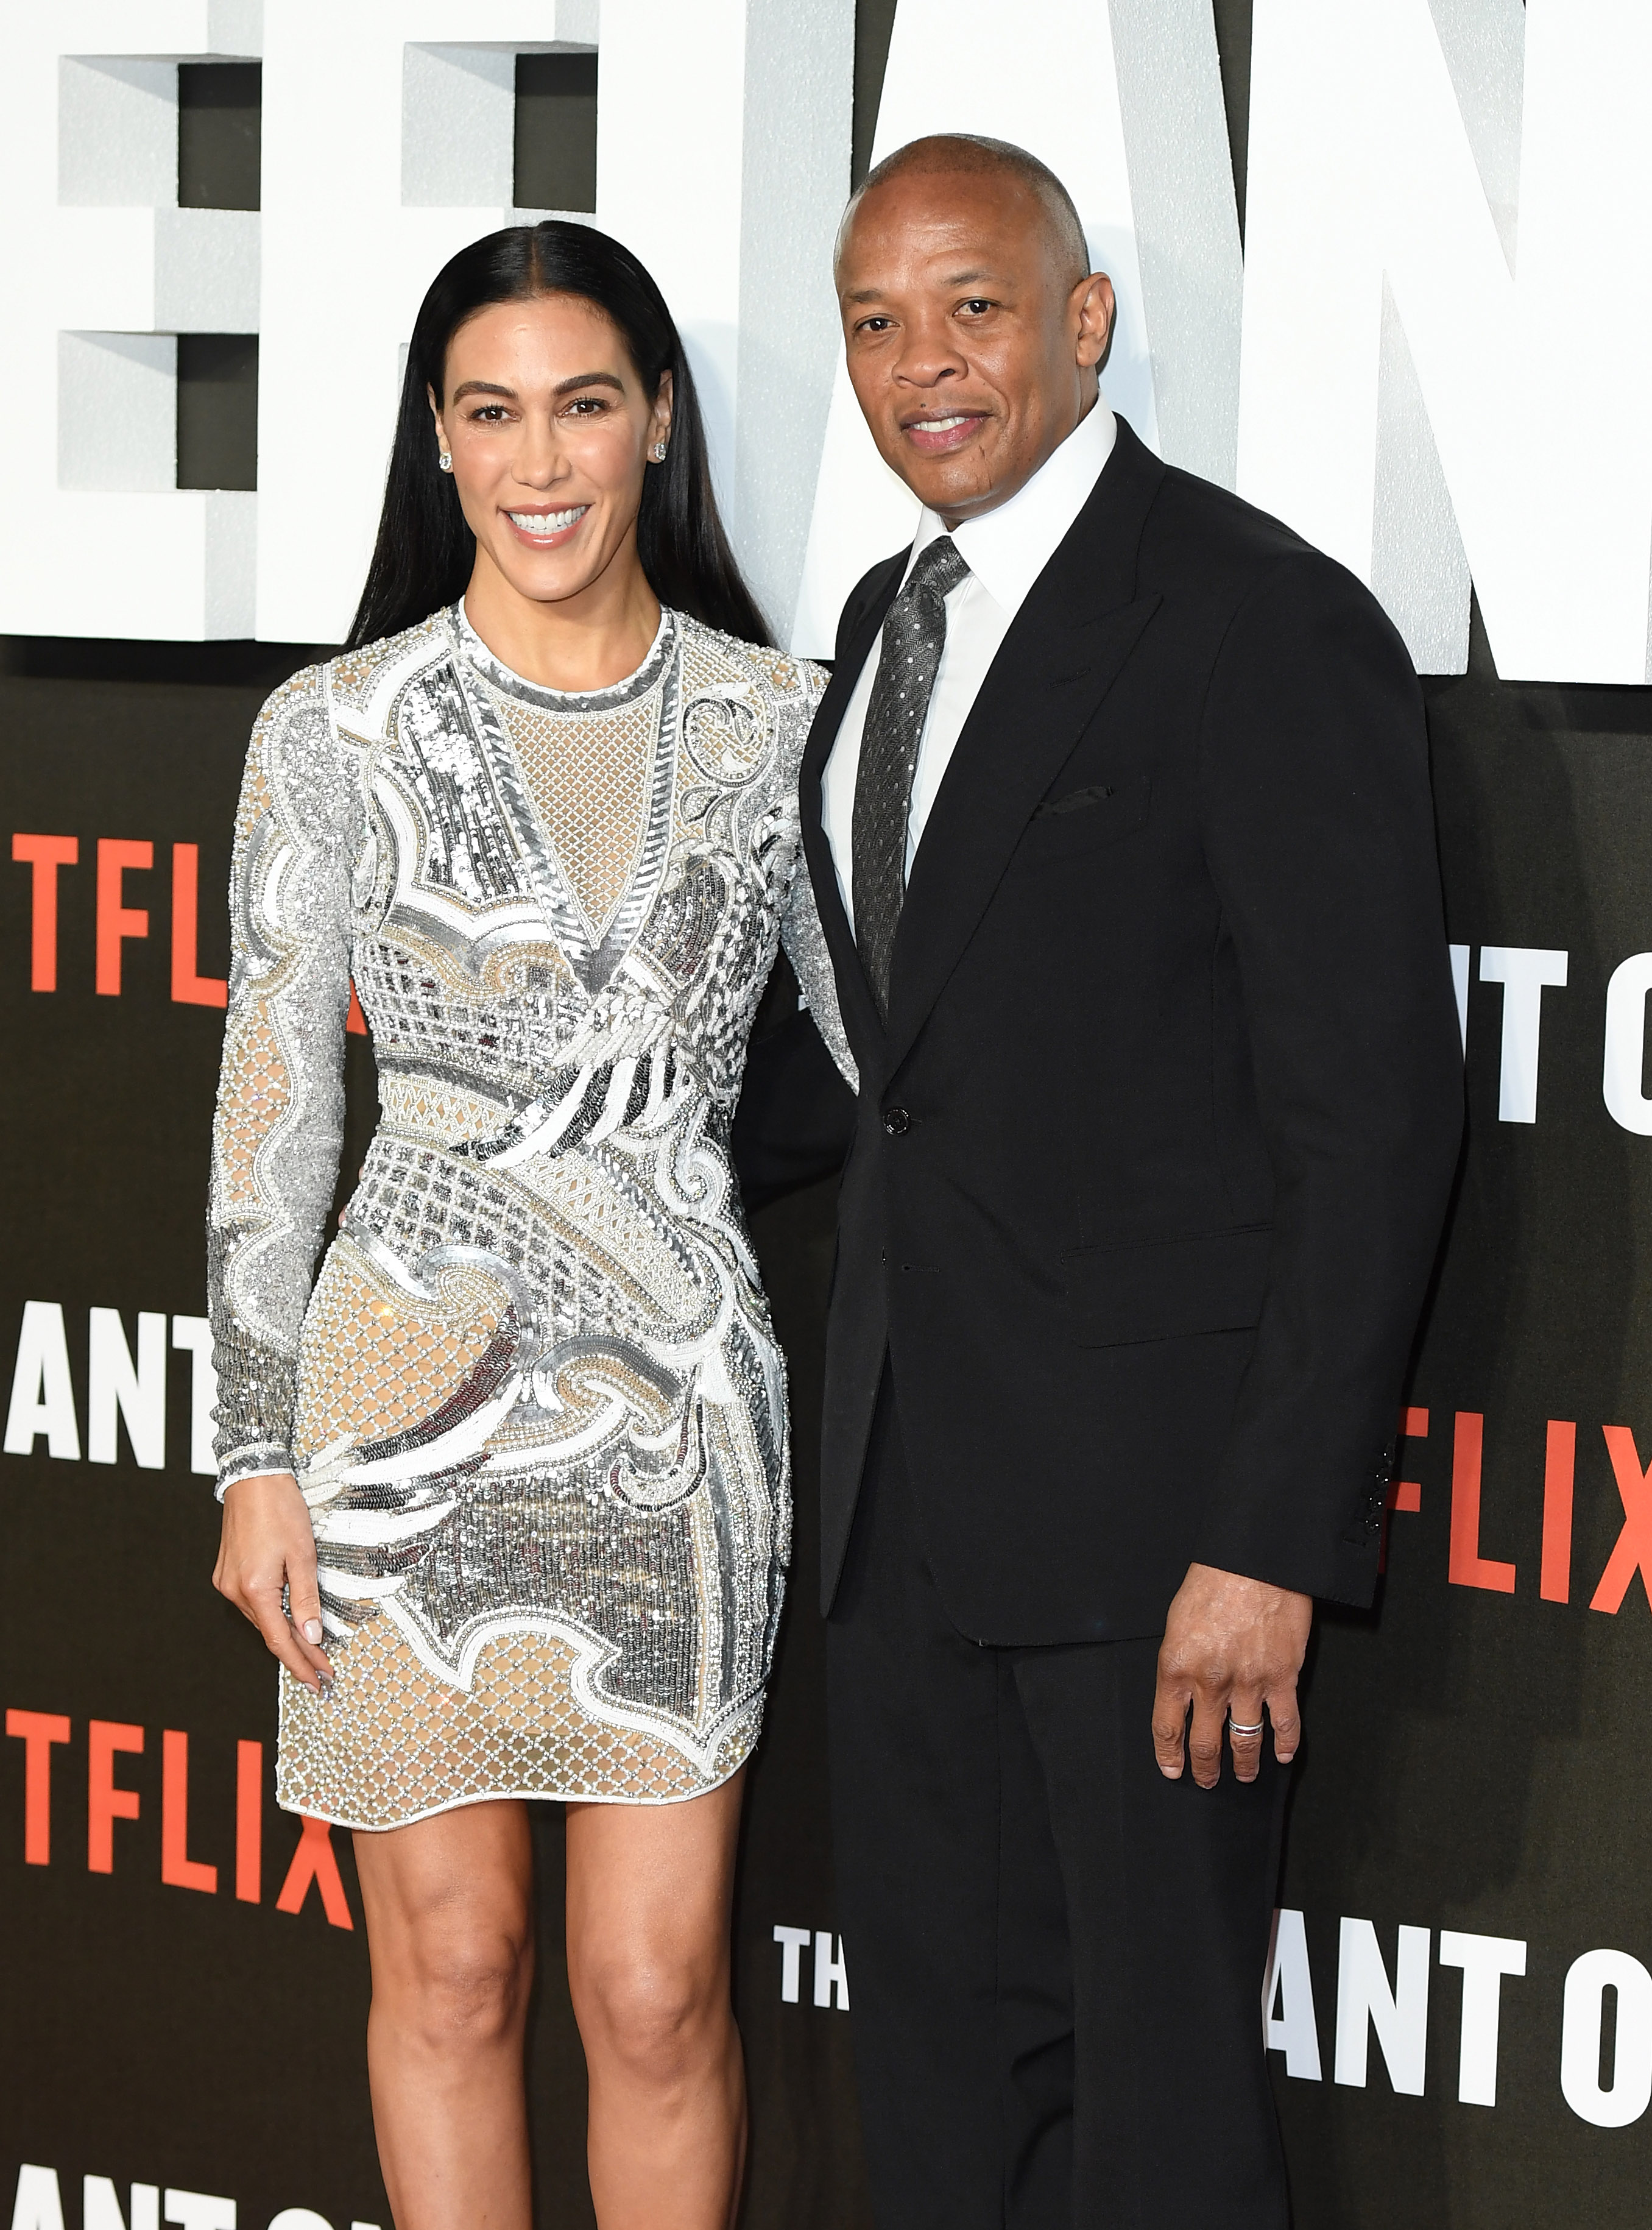 Dr. Dre and Nicole Young attend the special screening of "The Defiant Ones" on March 15, 2018 in London, United Kingdom | Source: Getty Images